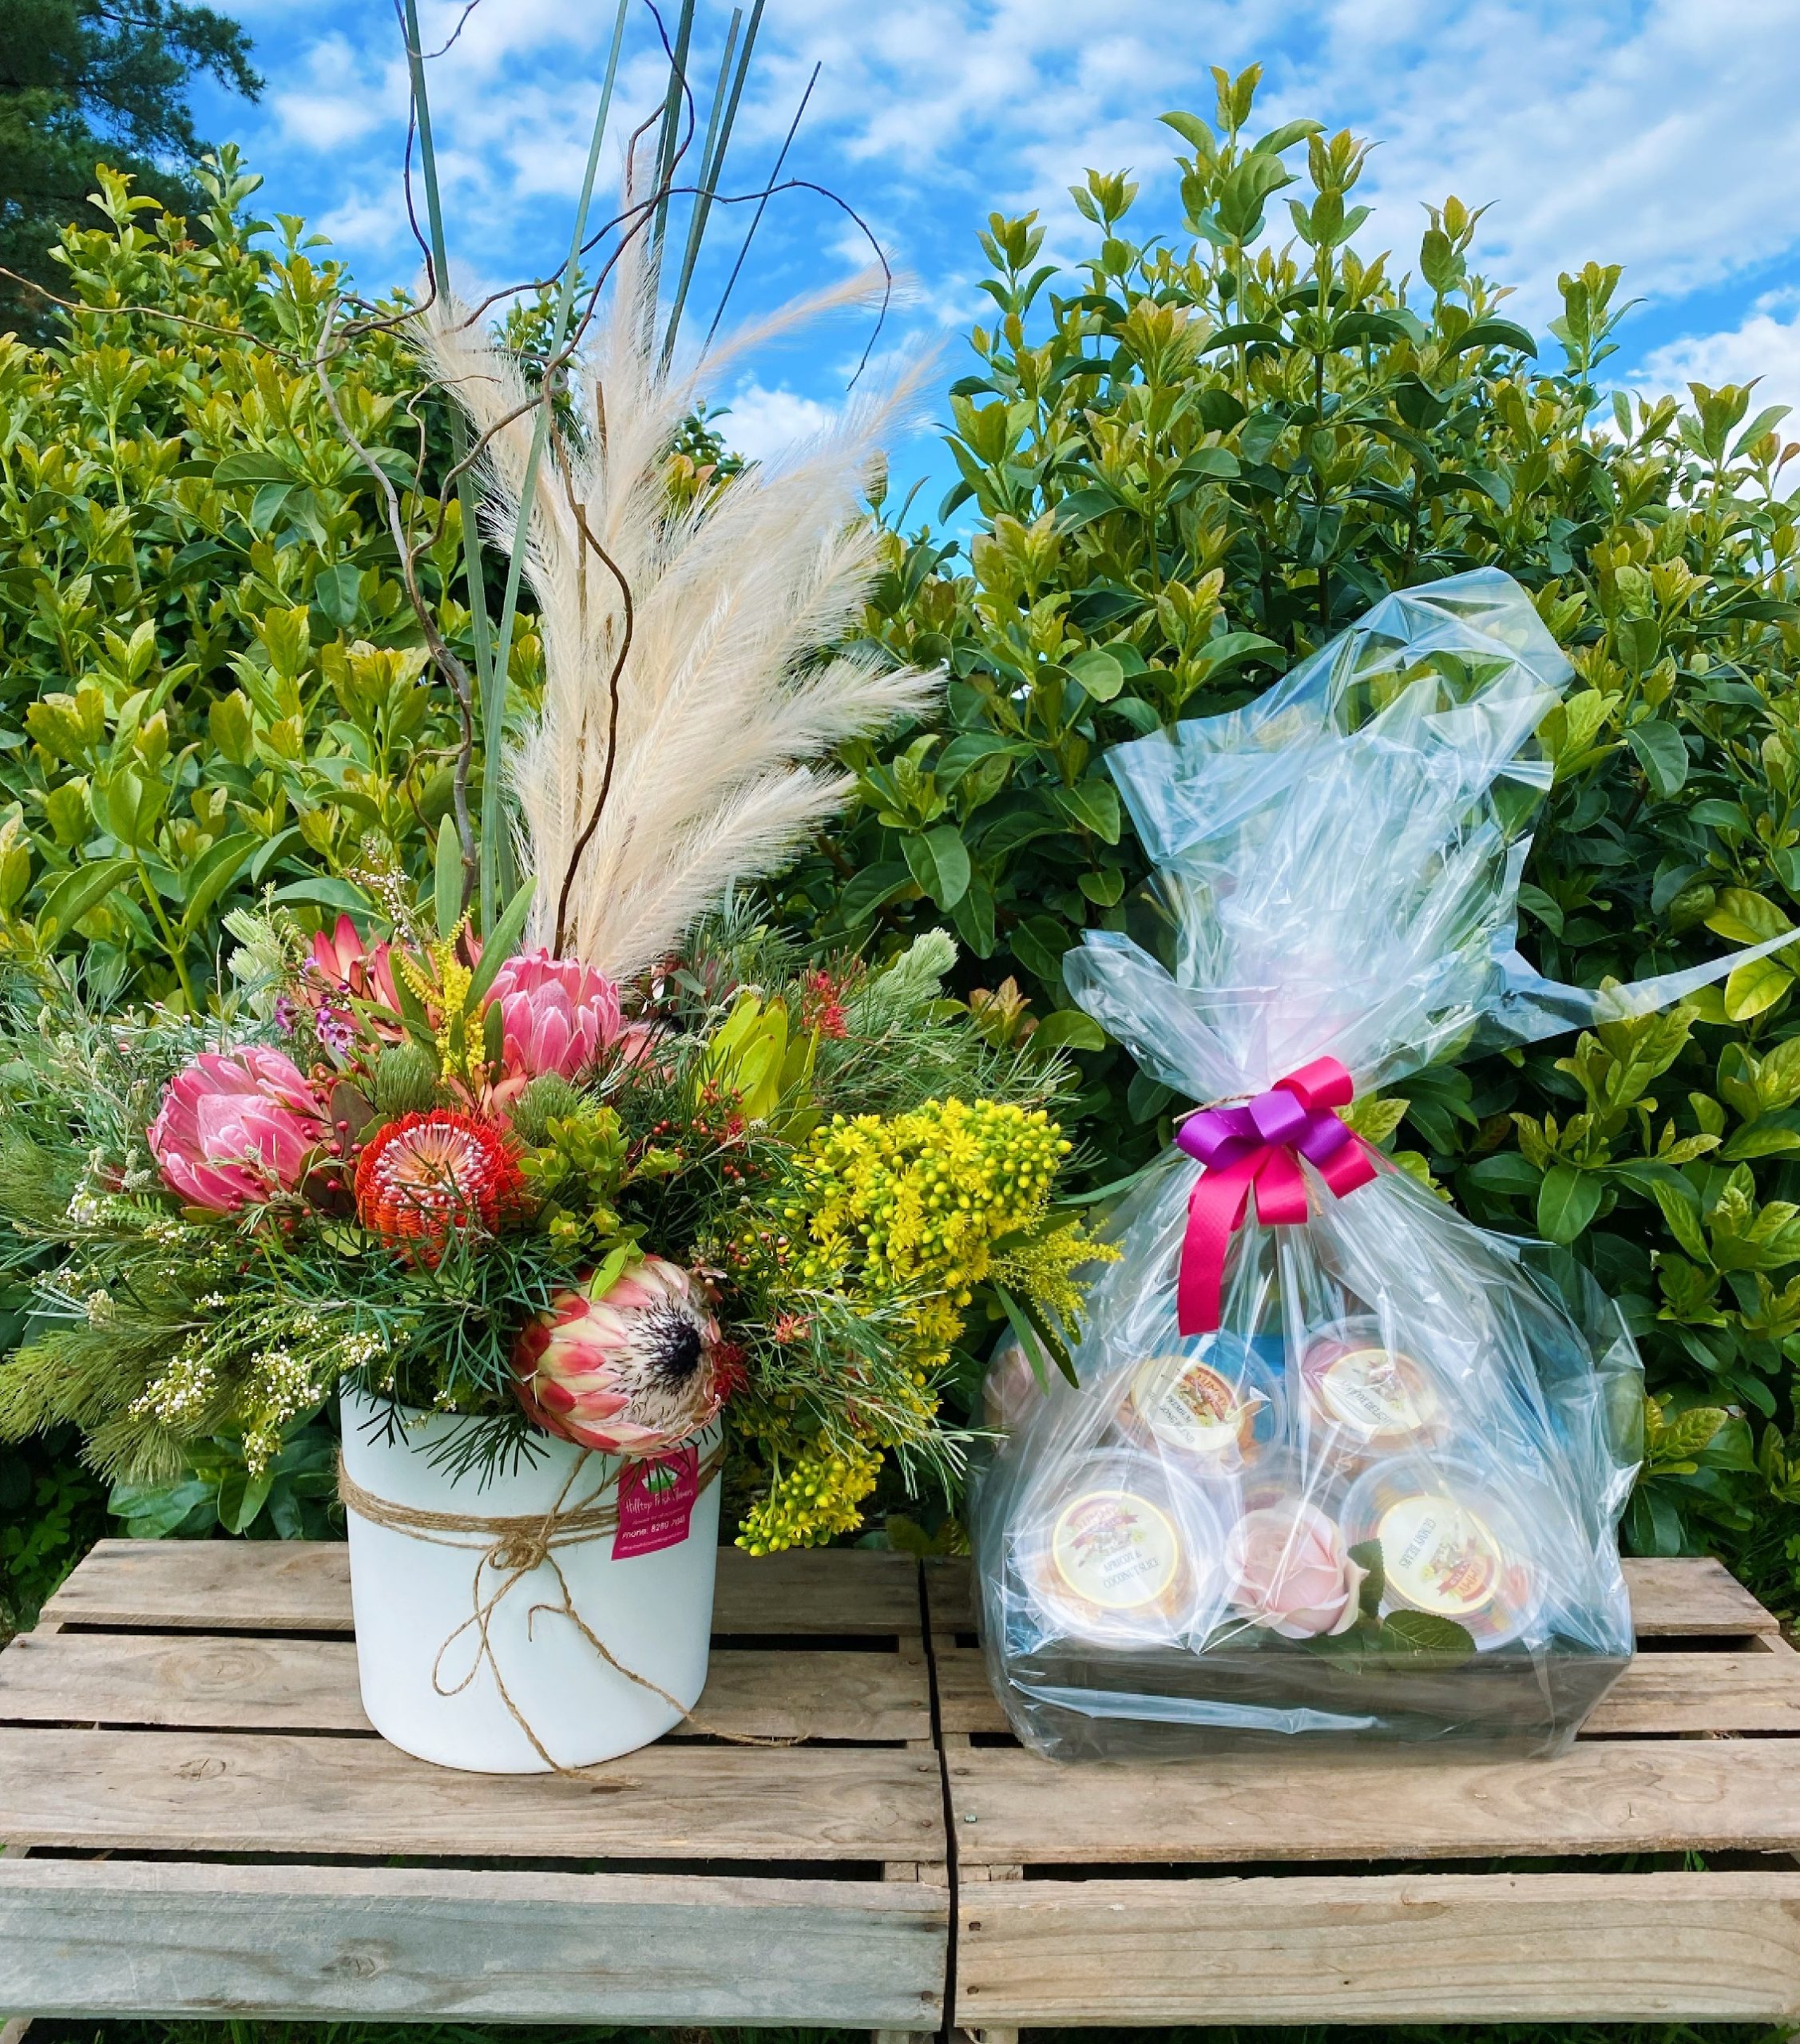 WIN a bouquet of flowers and a hamper from Hilltop Fresh Flowers for you and your bestie!